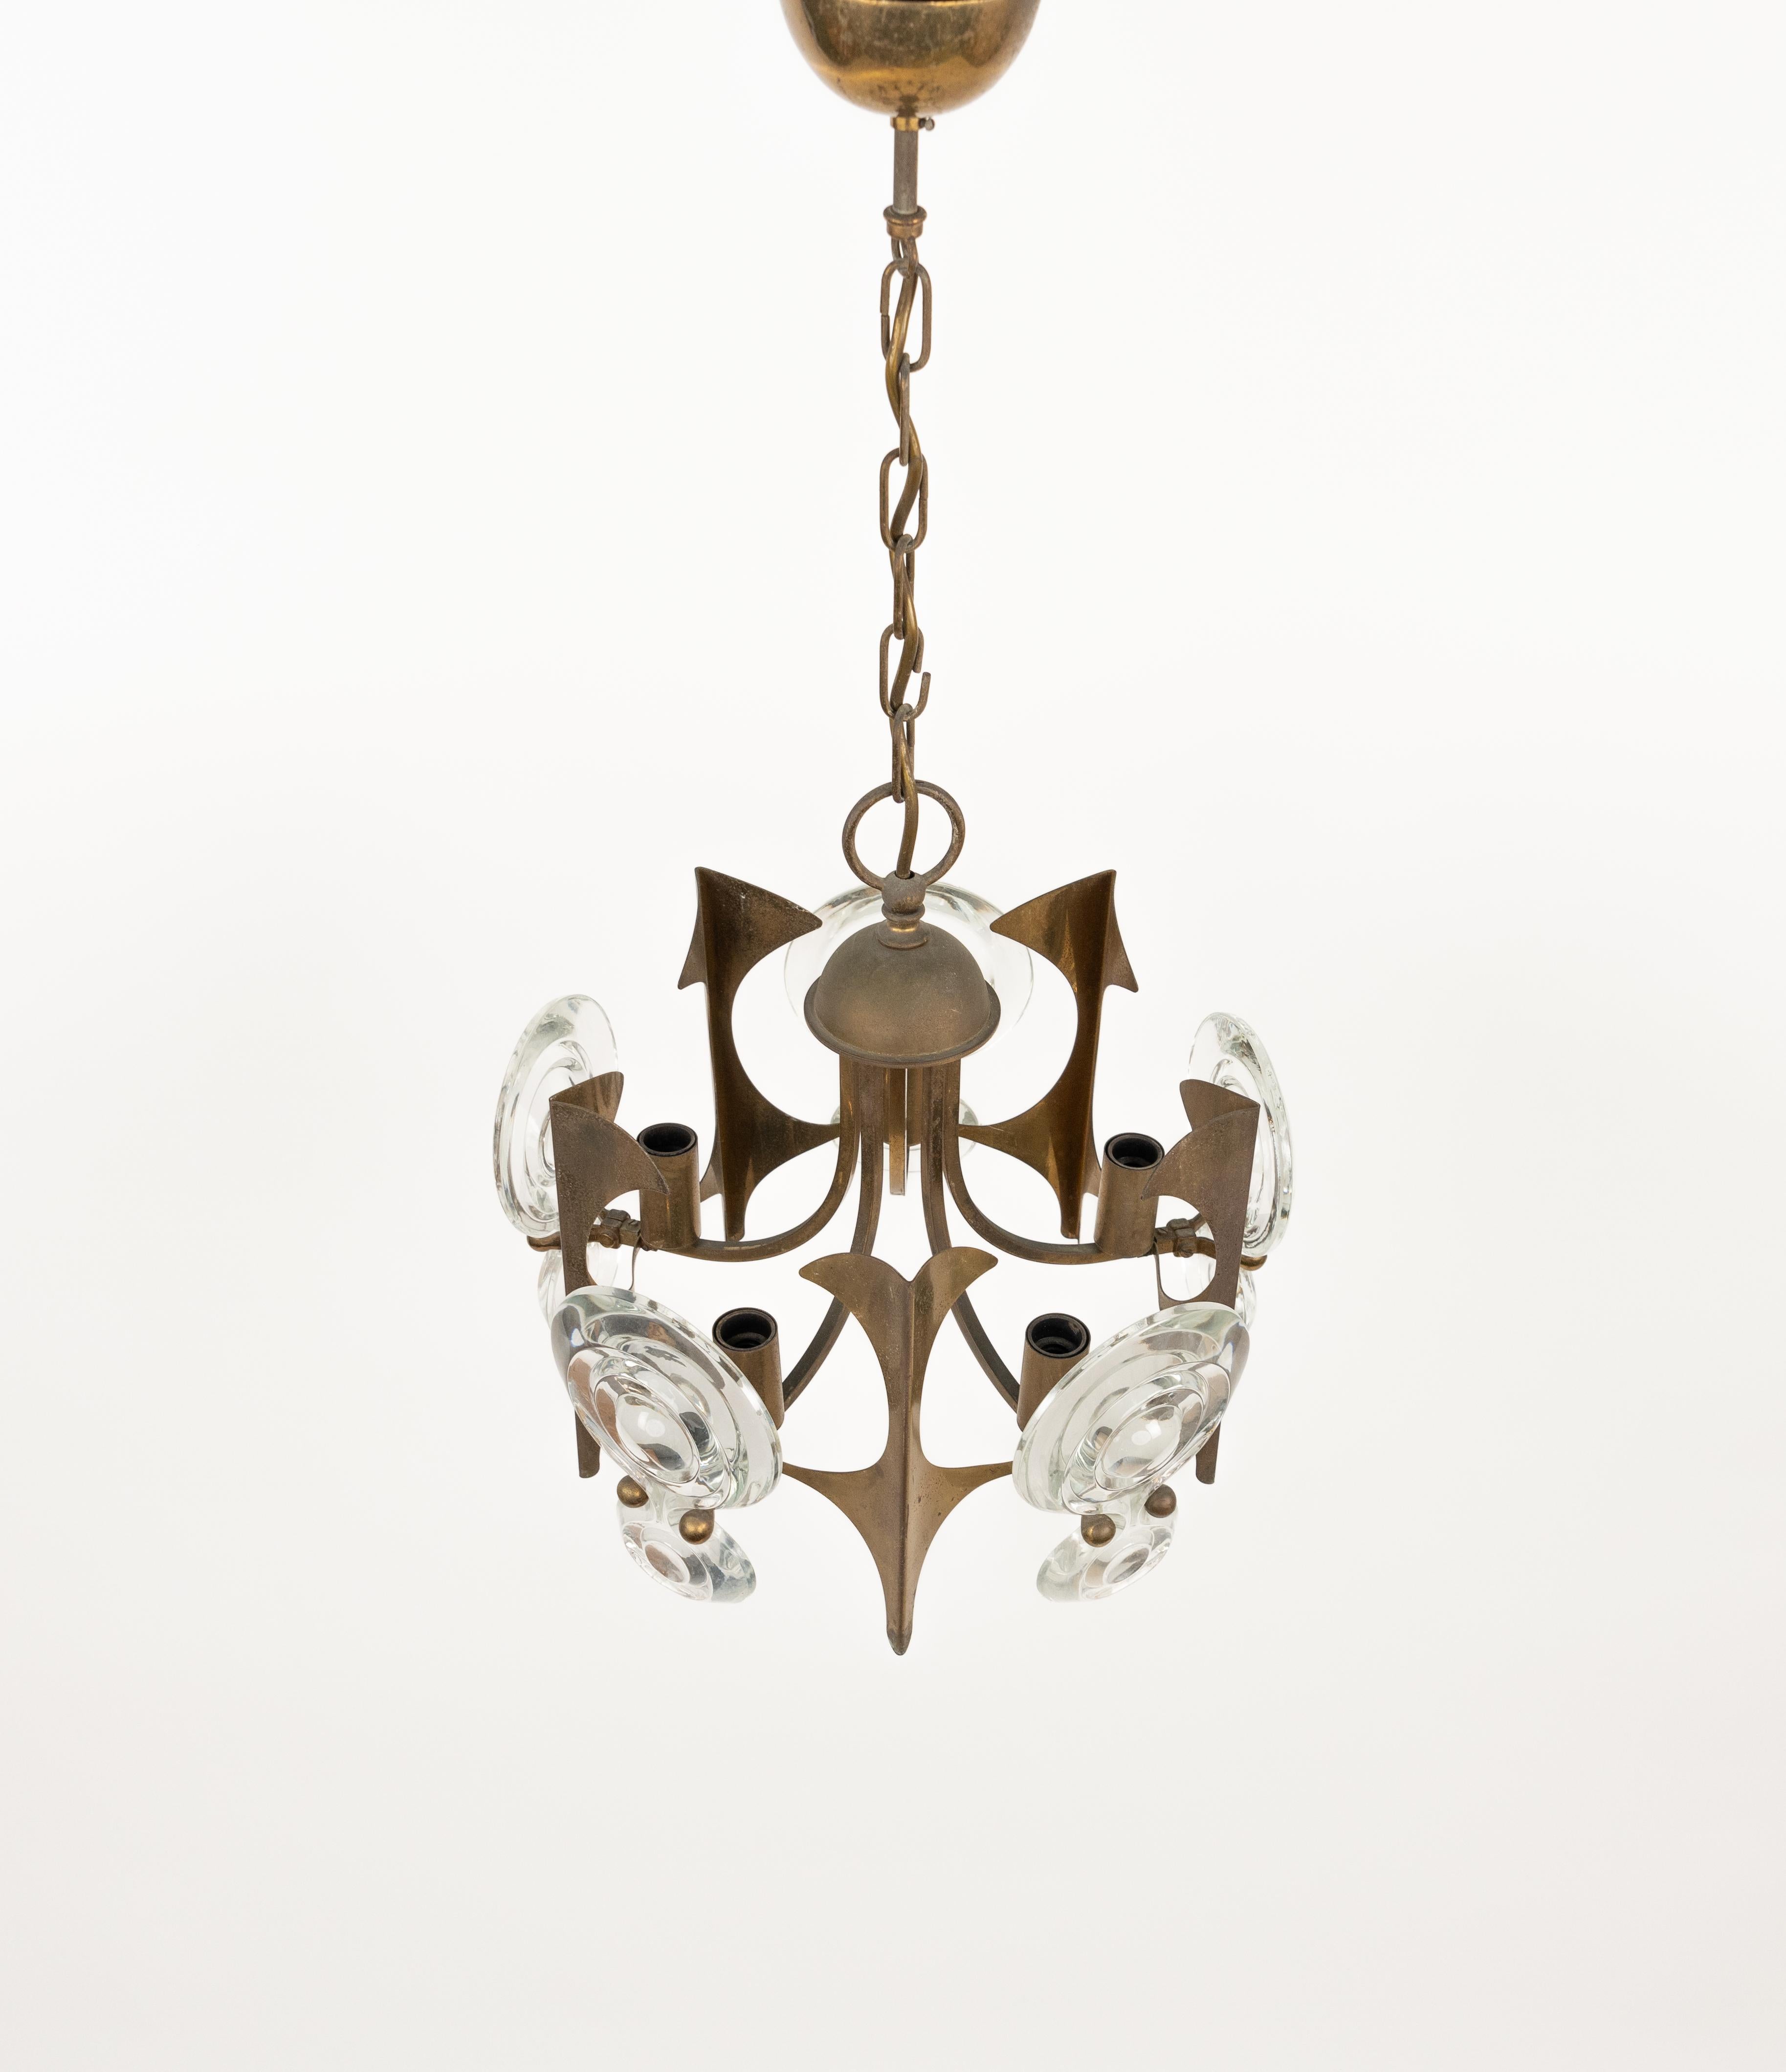 Mid-Century Modern Midcentury Chandelier Brass and Glass by Oscar Torlasco, Italy 1960s For Sale